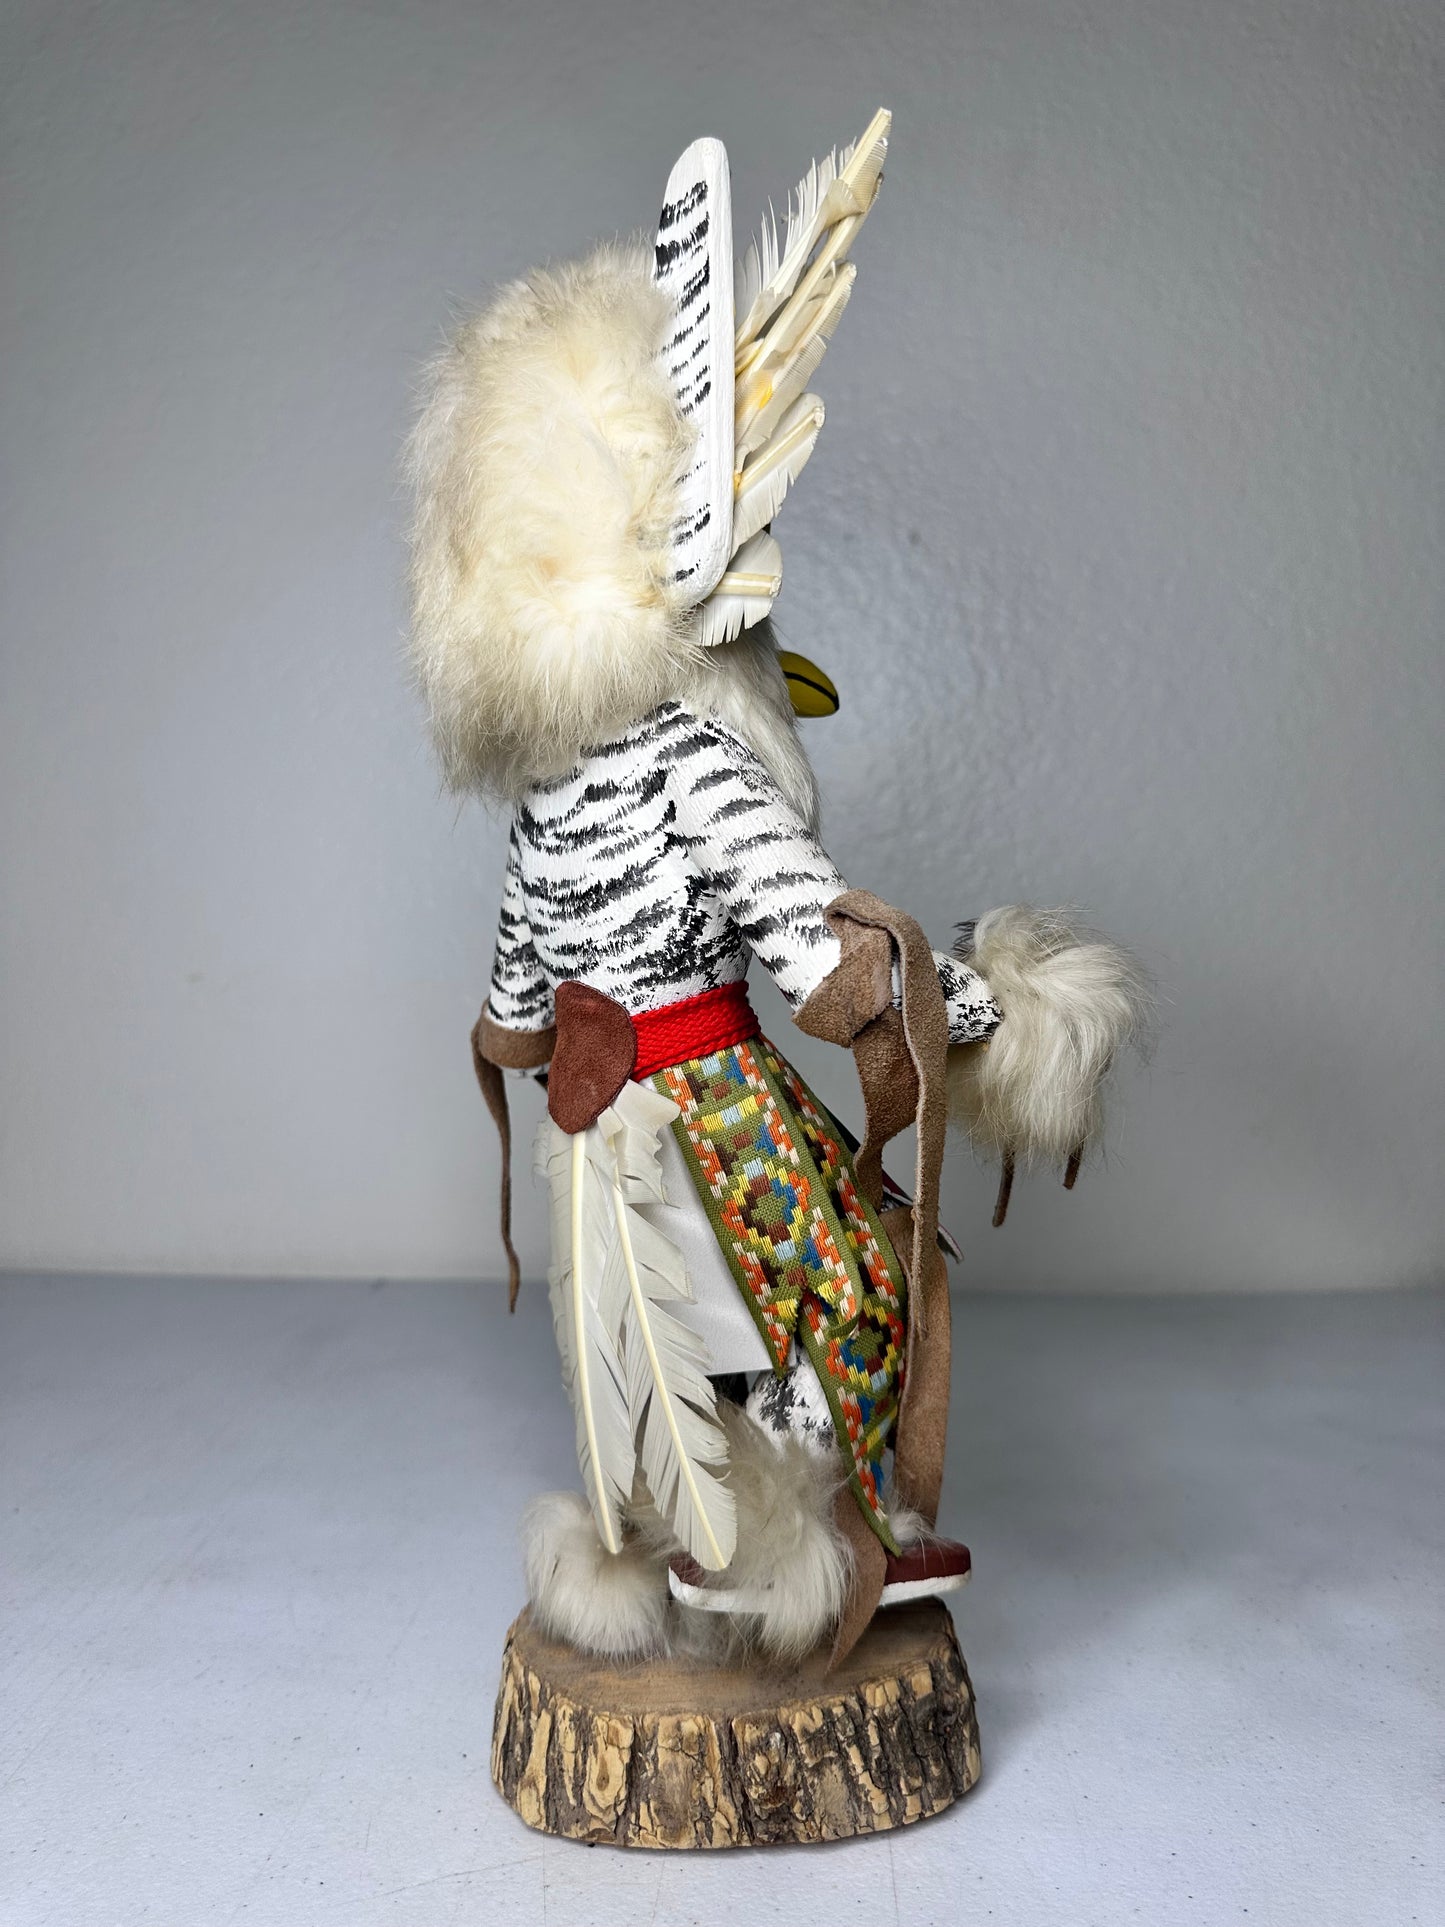 Handcrafted Snowy Owl Kachina Doll by Bakabi - Authentic Native American Collectible